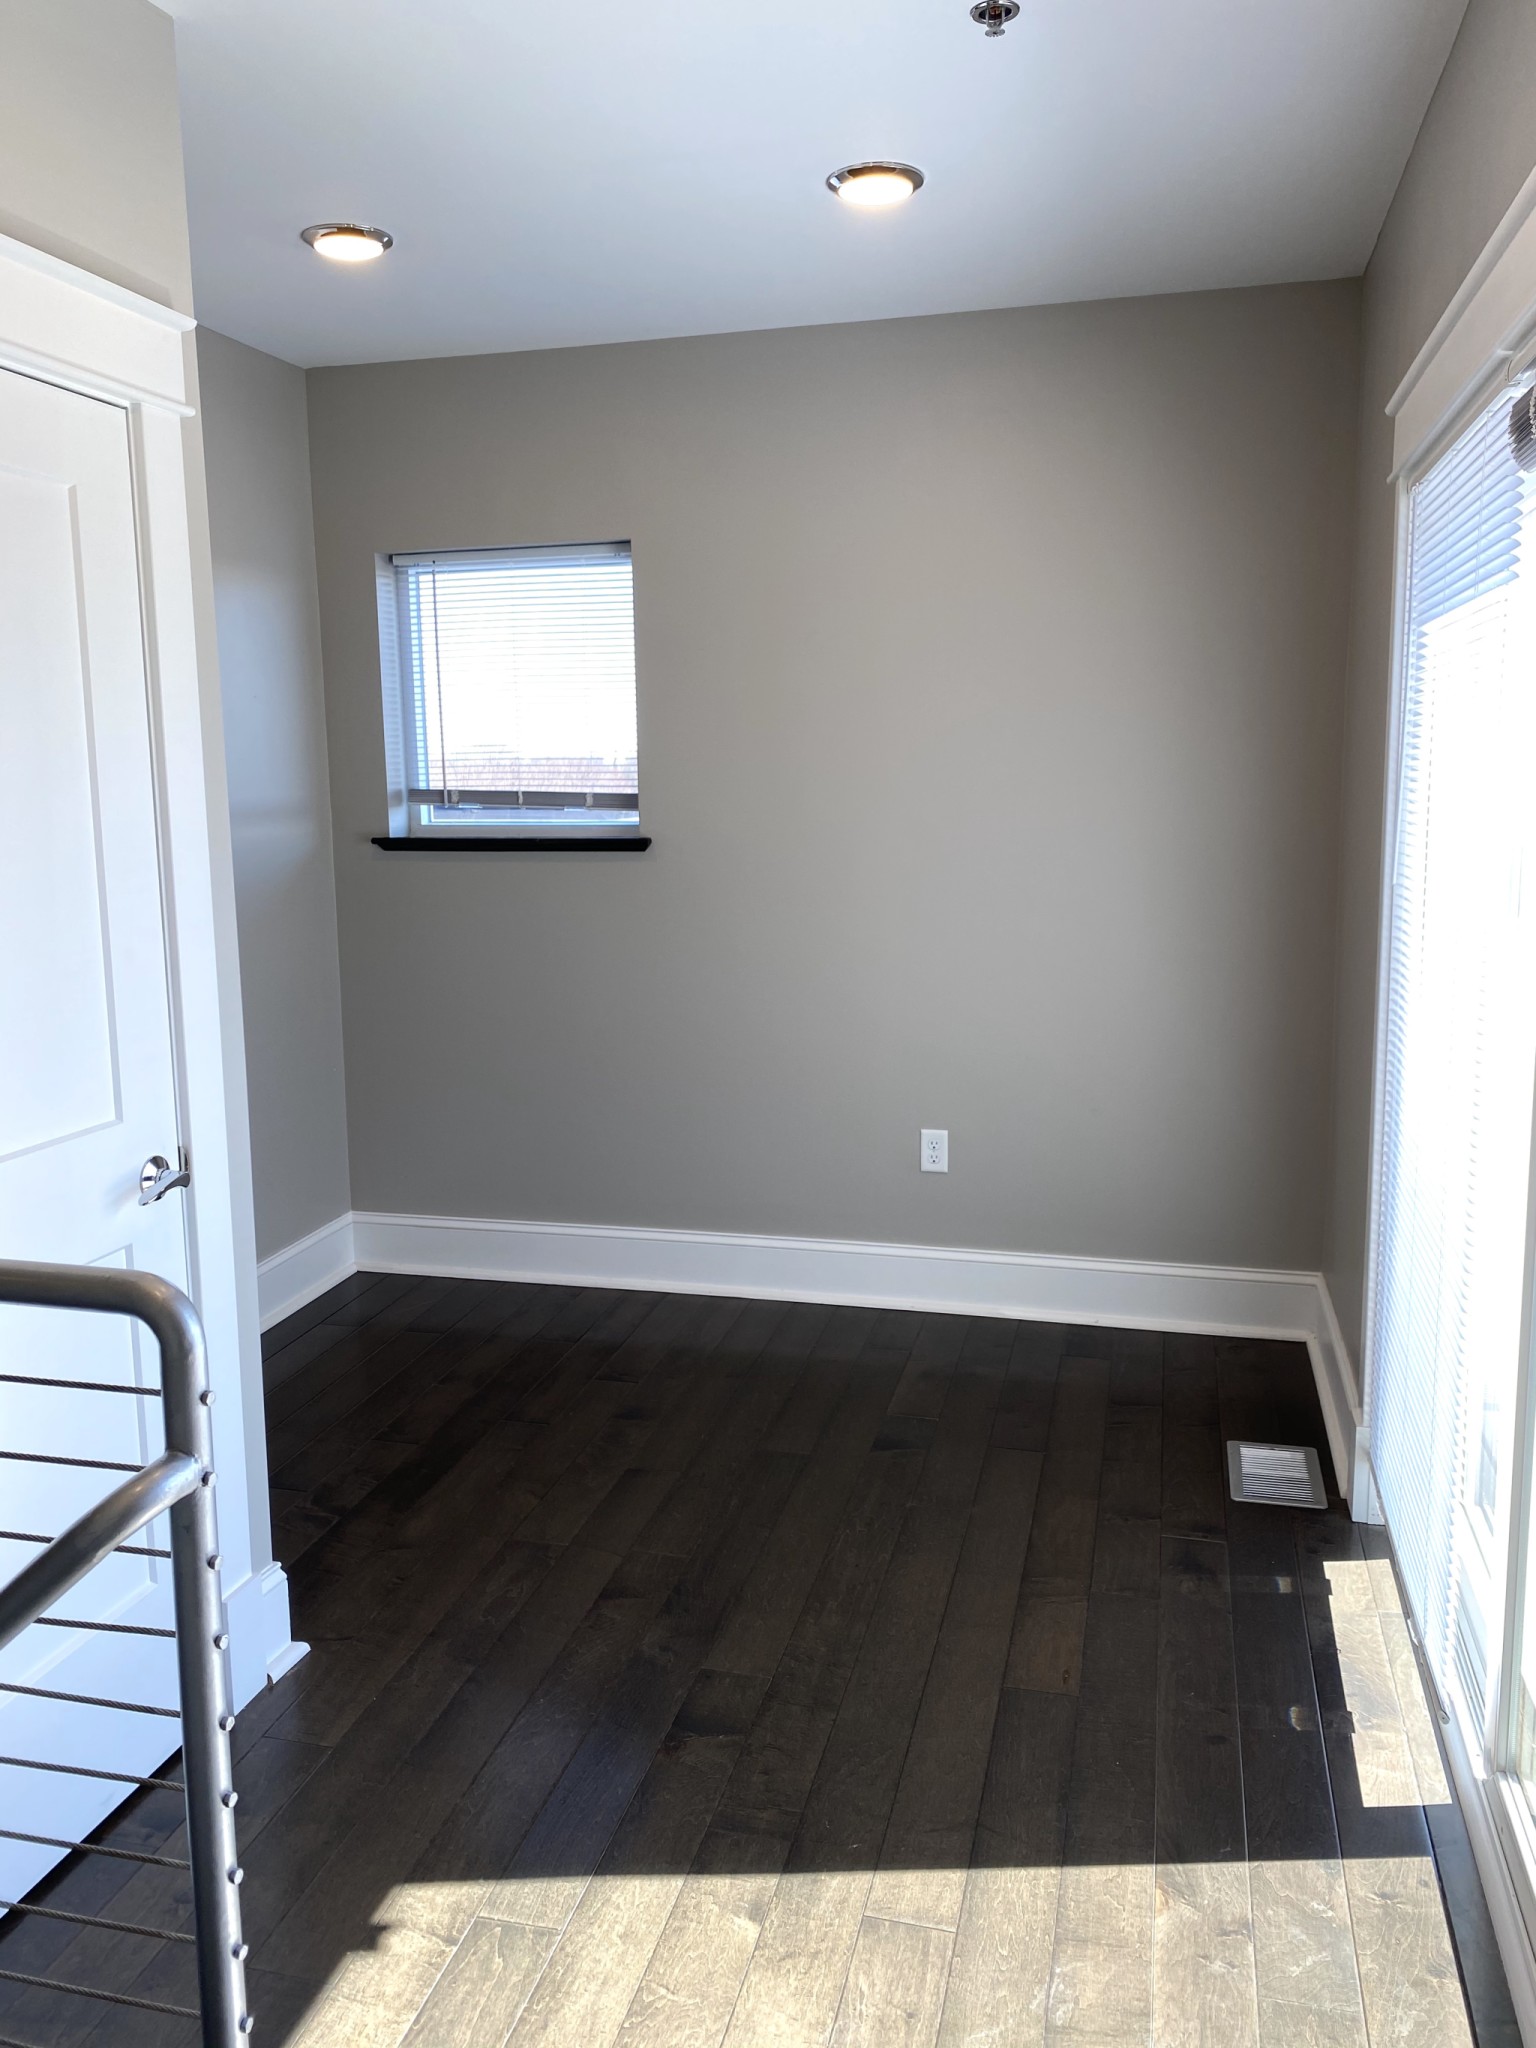 Photos of apartment on Howard St.,Watertown MA 02472